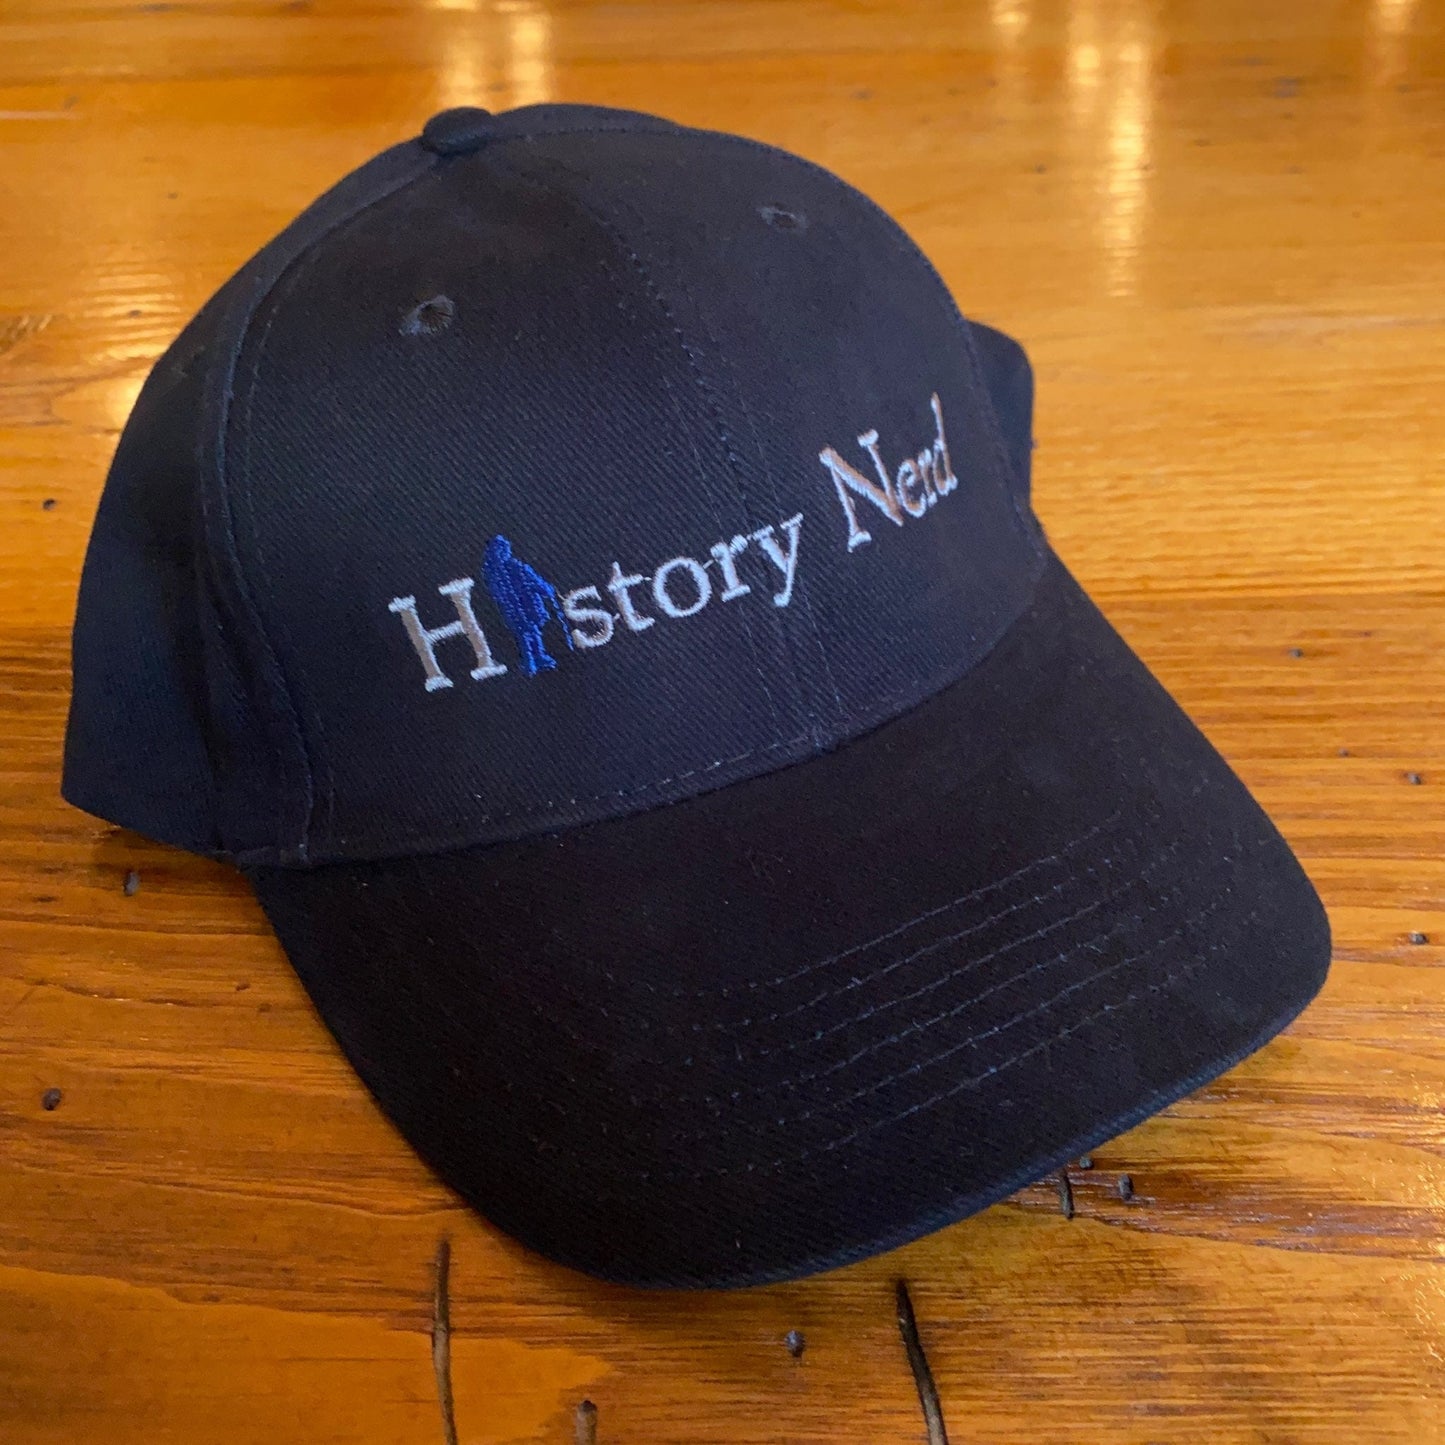 Embroidered "History Nerd" with Ben Franklin cap - Black from The History List Store